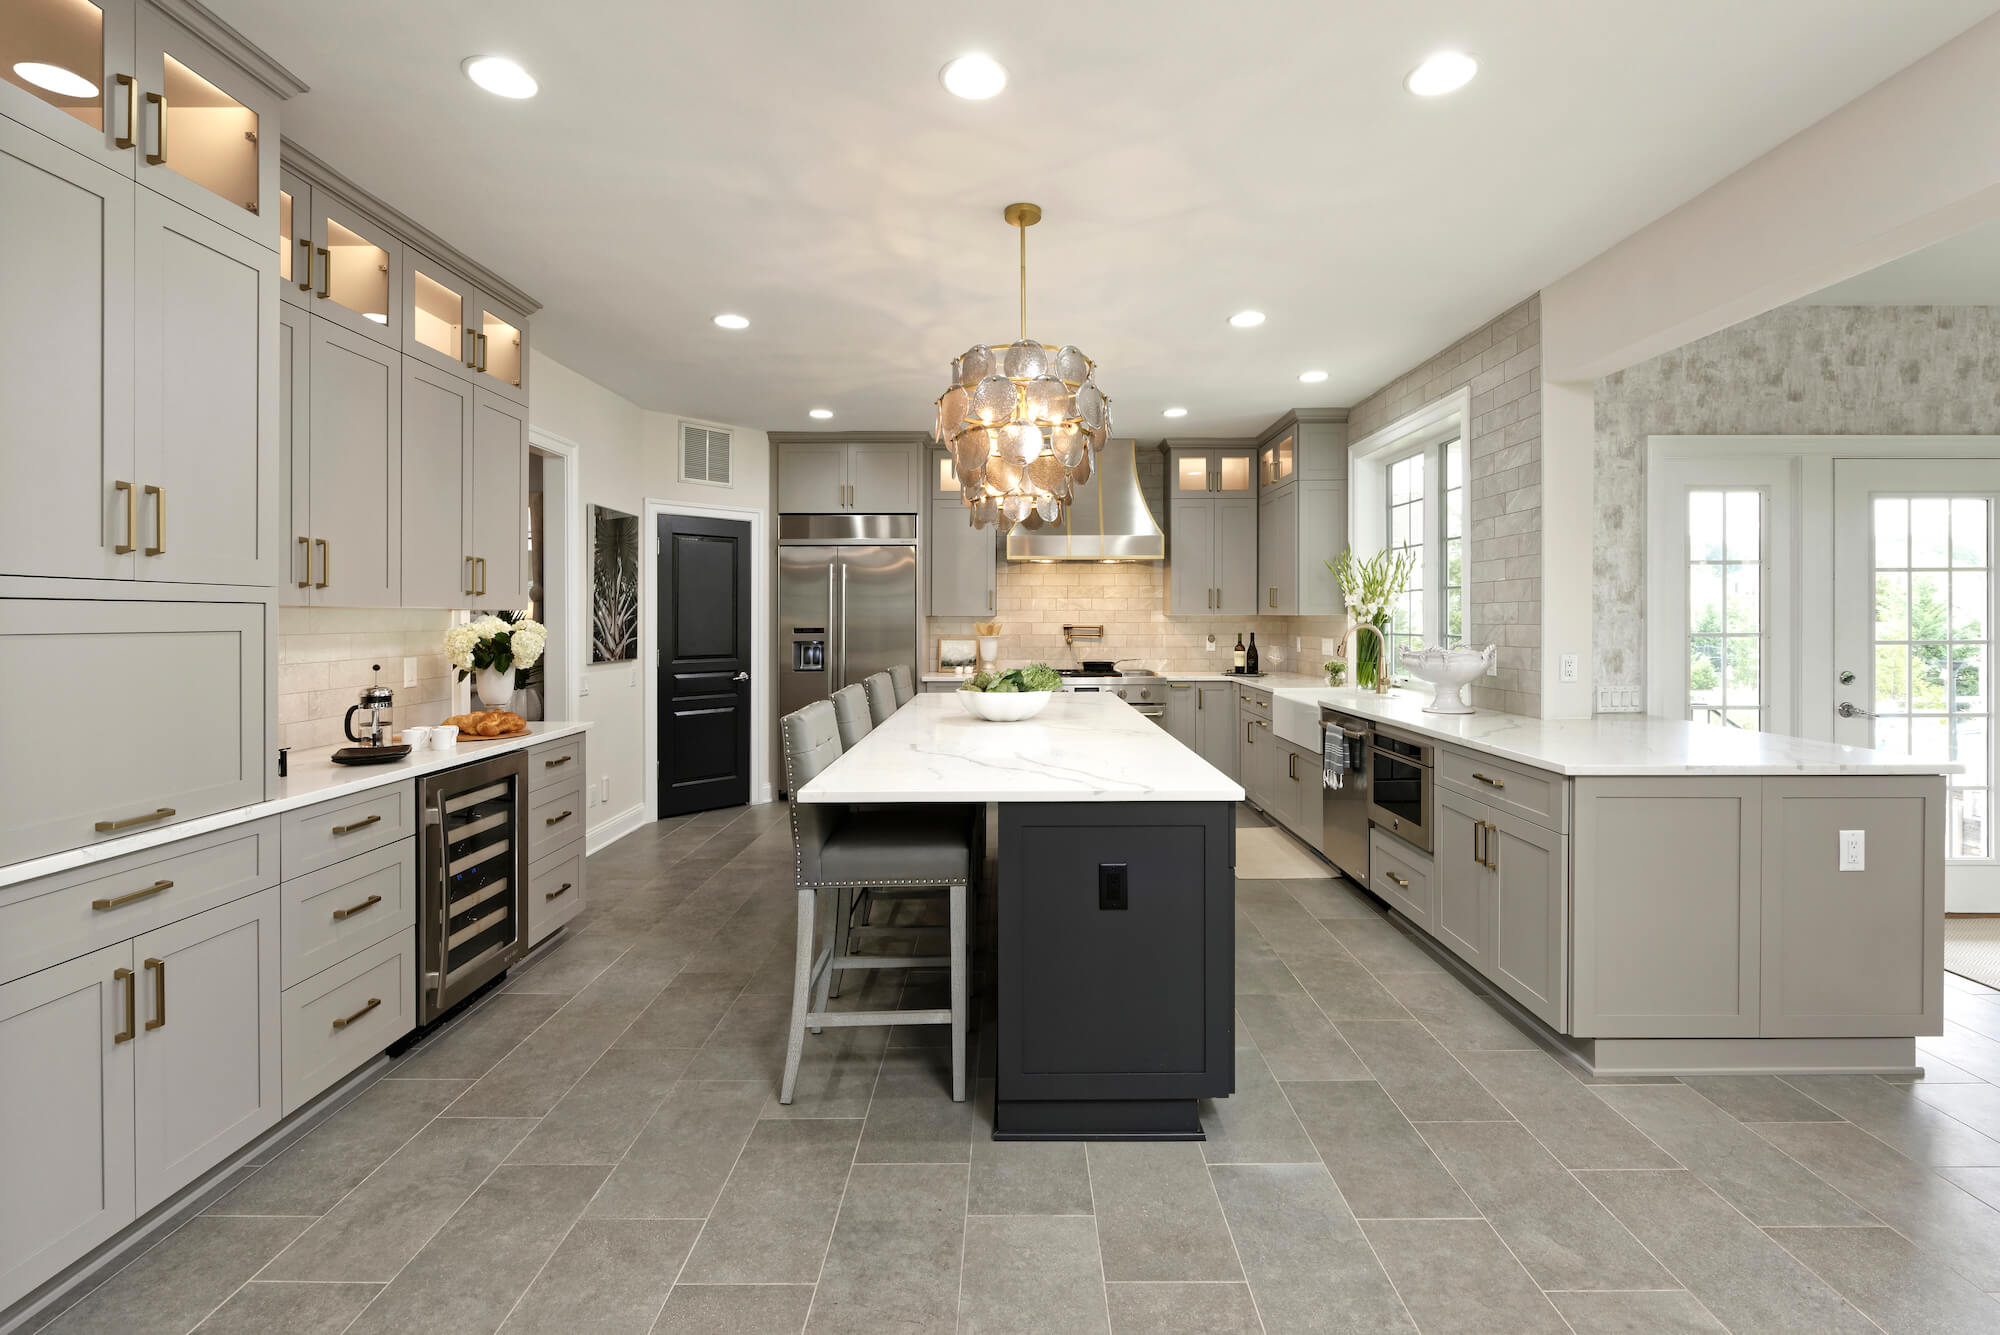 Kitchen Remodeling Tips: What to Know Before You Begin